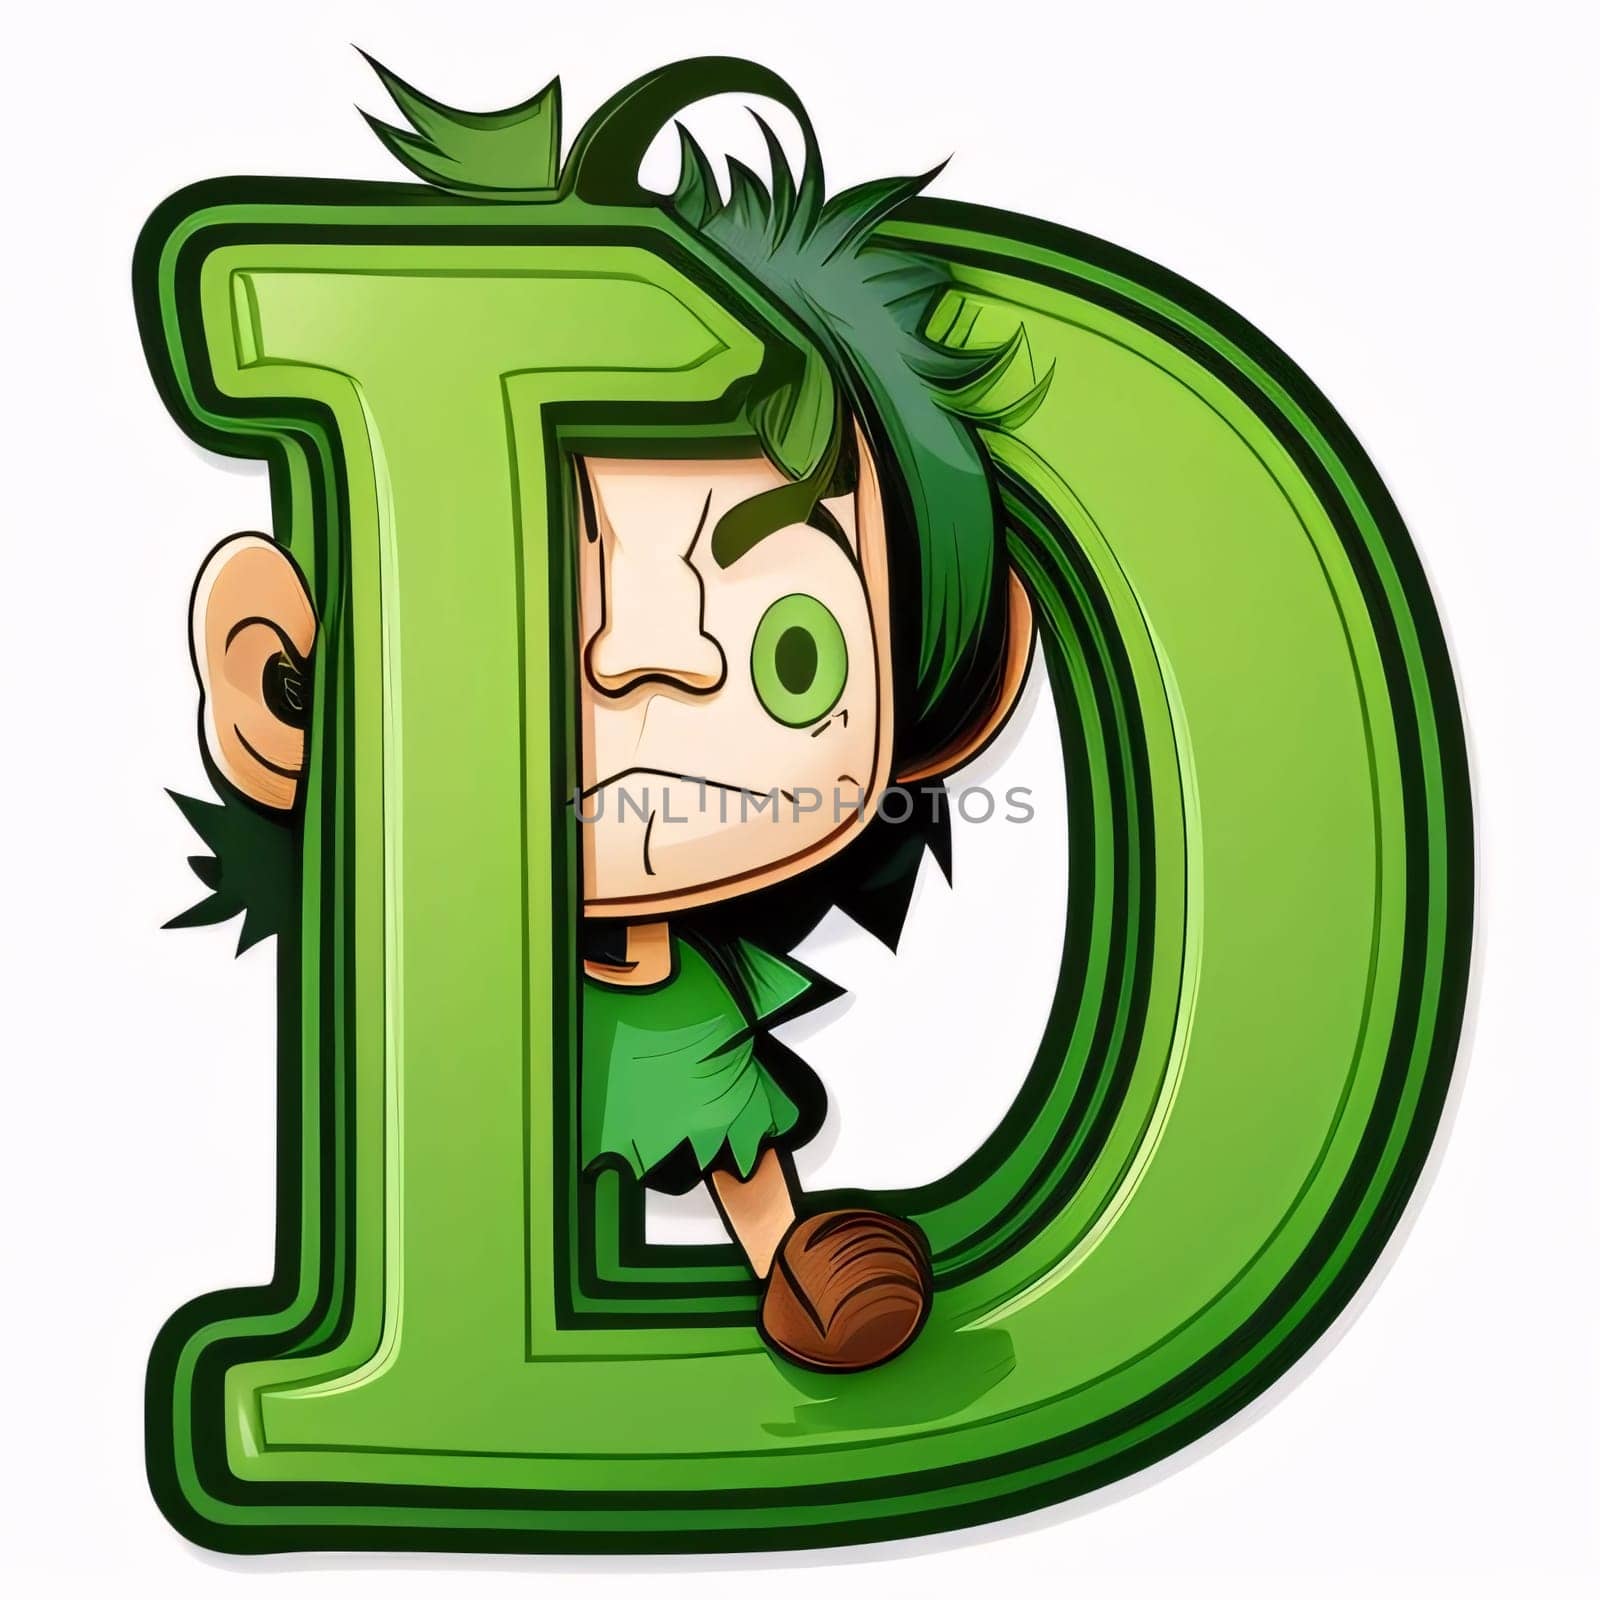 Graphic alphabet letters: Cute cartoon green letter D with funny face - vector illustration.